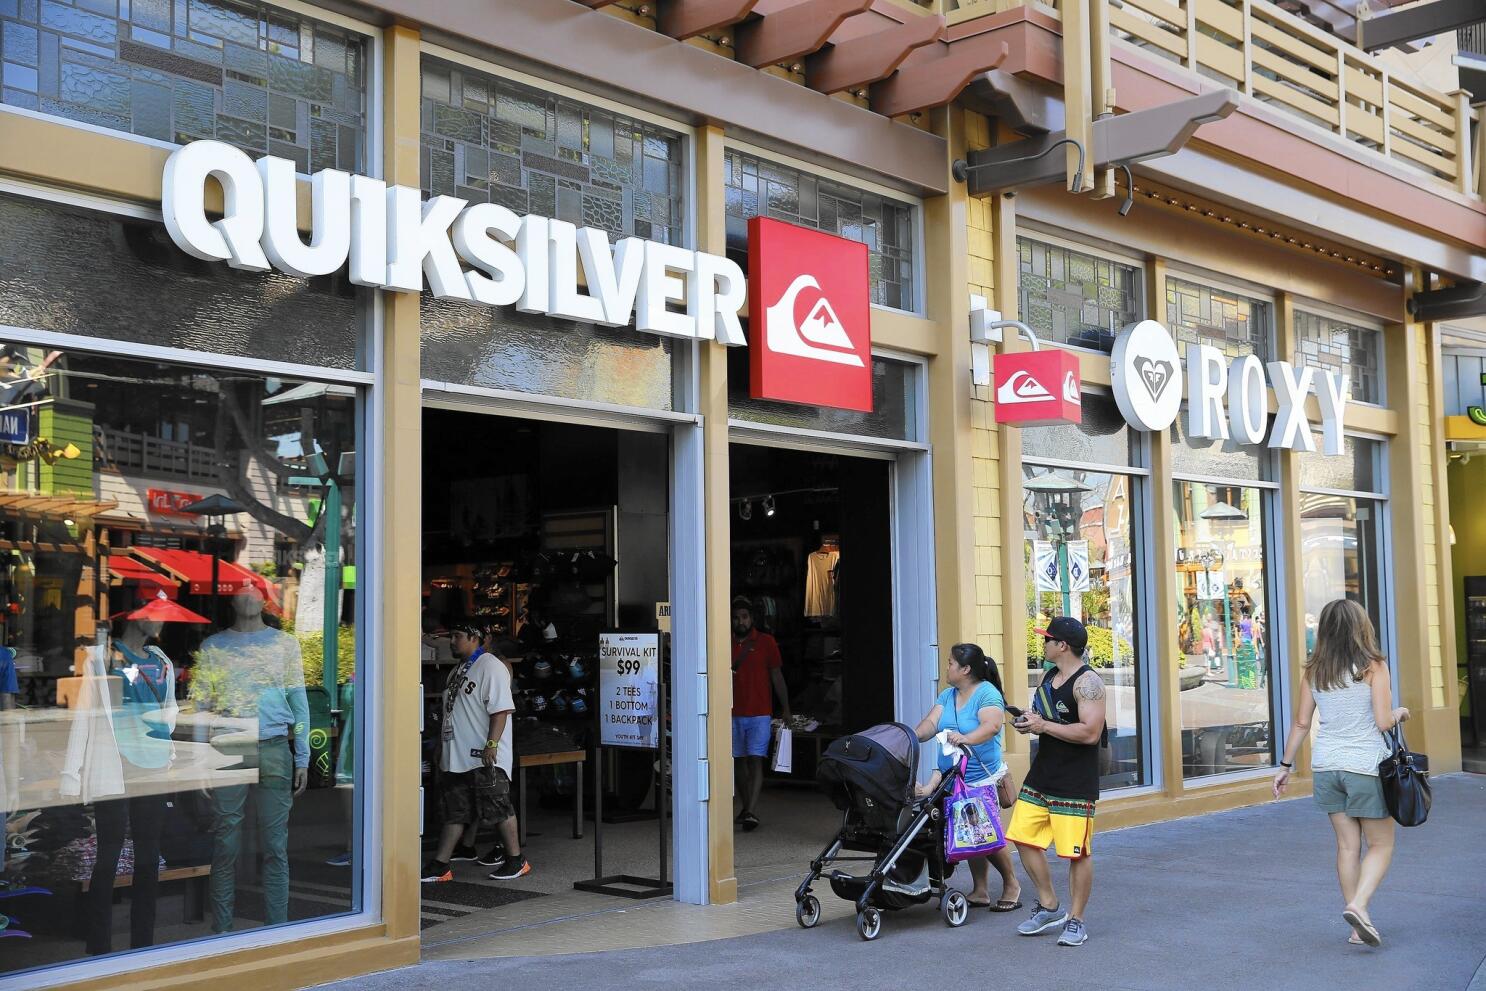 Quiksilver files for bankruptcy in U.S.; local stores on closure